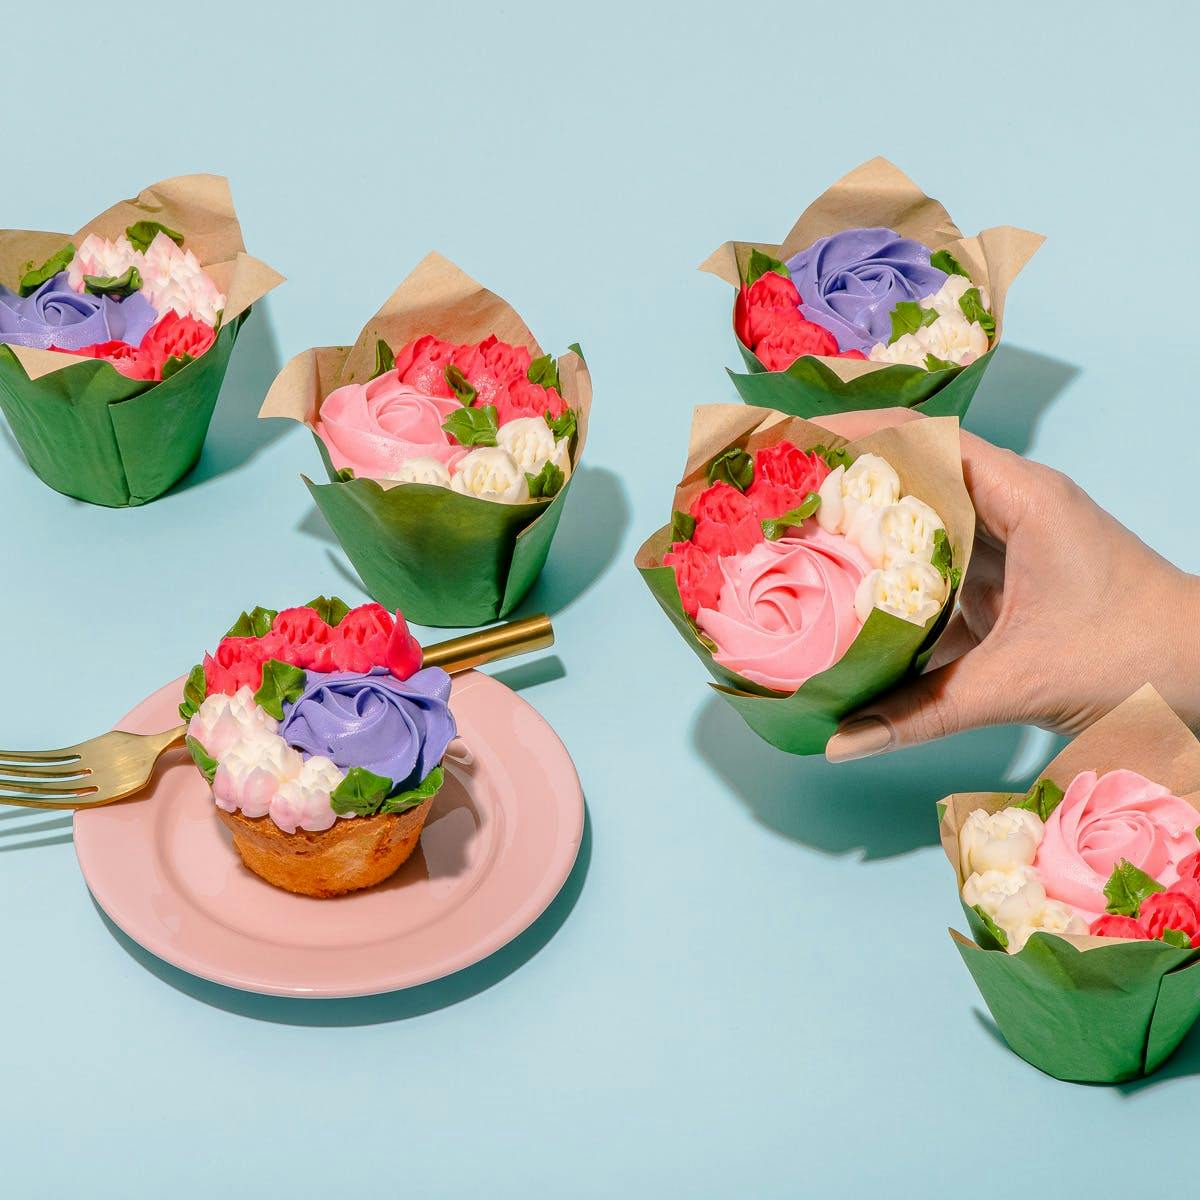 JUMBO Flower Cupcakes delivered